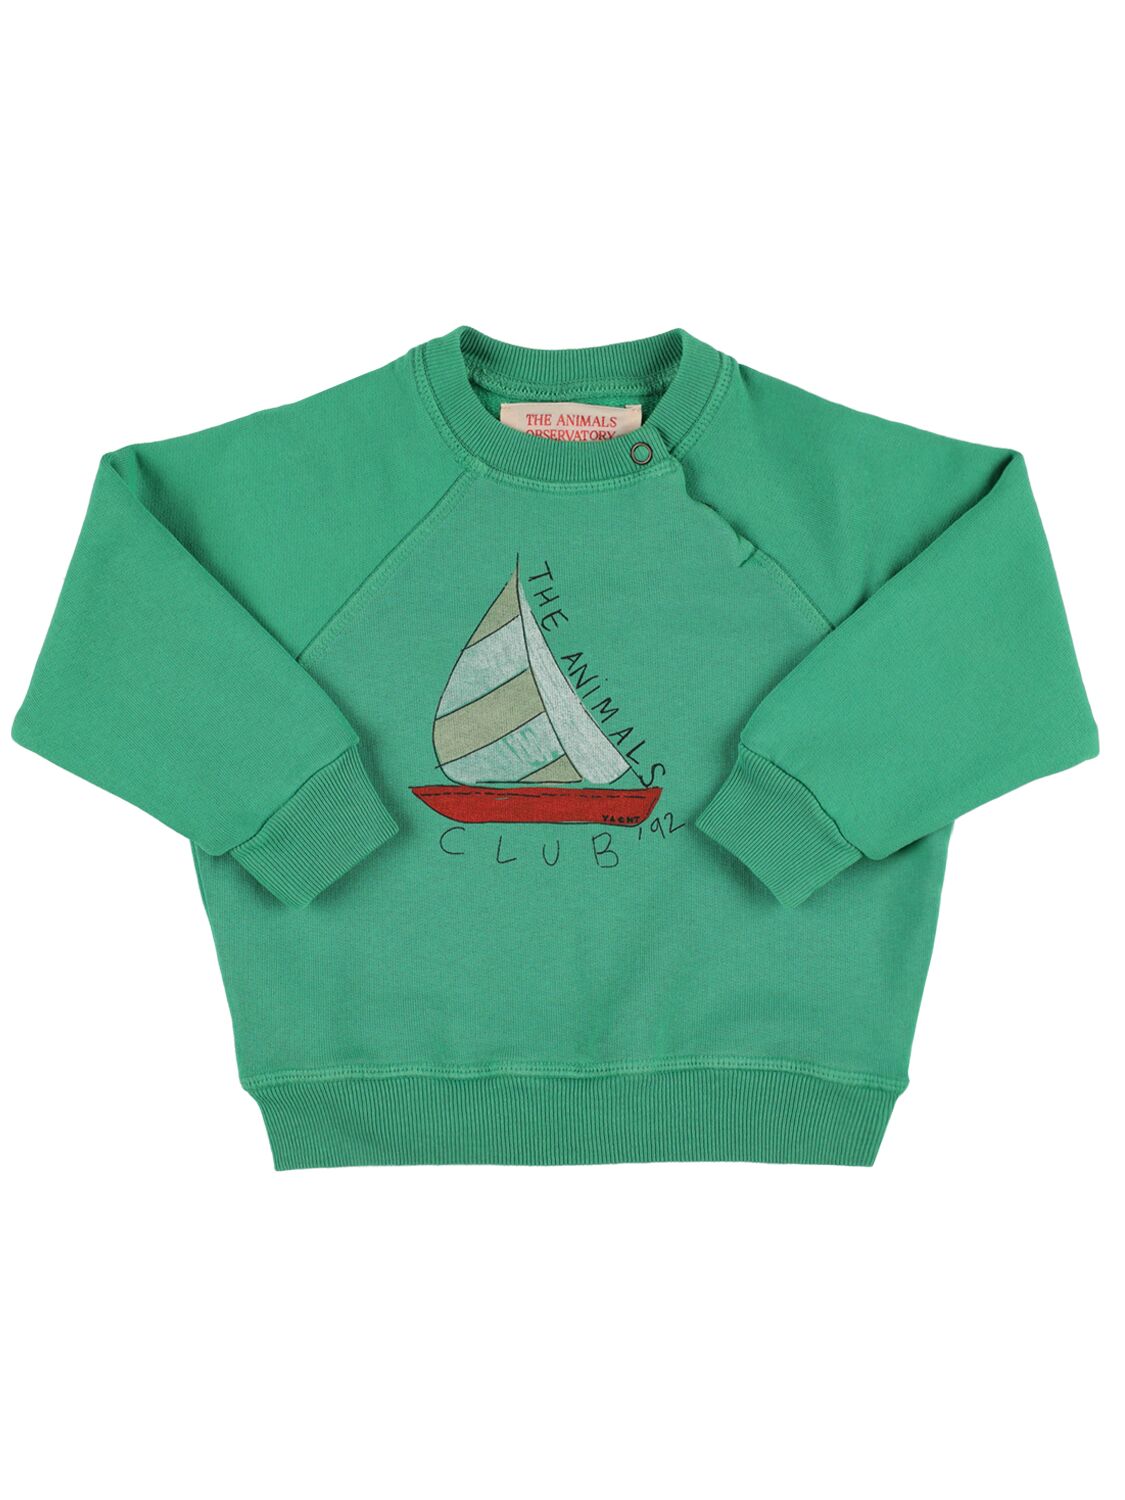 The Animals Observatory Babies' Sailboat Printed Cotton Sweatshirt In Green